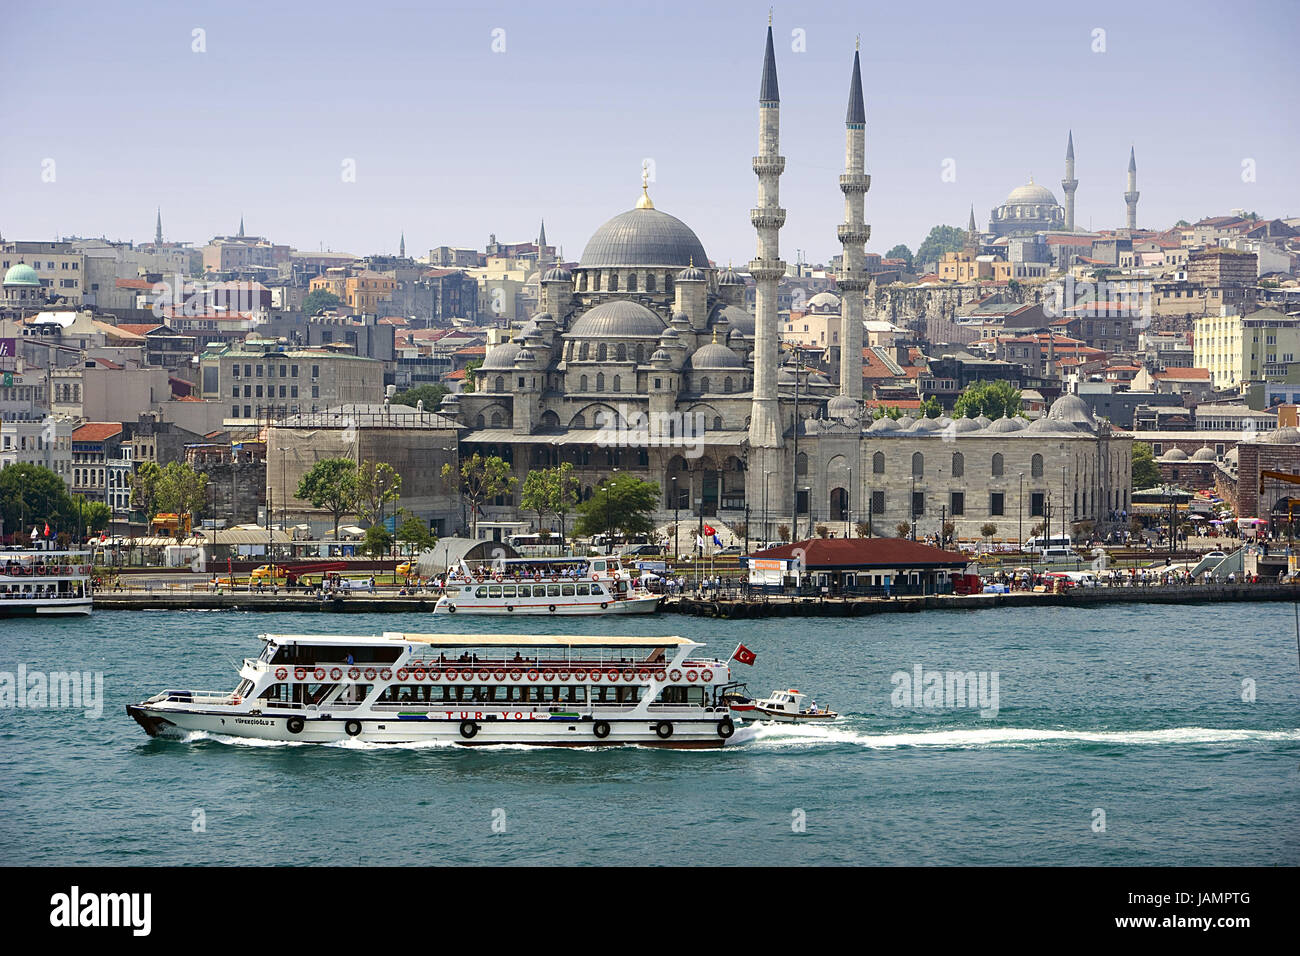 Turkey,Istanbul,town view,'the Golden Horn',ships,town,city,metropolis,port,culture,place of interest,tourism,architecture,the Bosporus,sea,navigation,holiday ships,towers,minarets,mosque,domes, Stock Photo